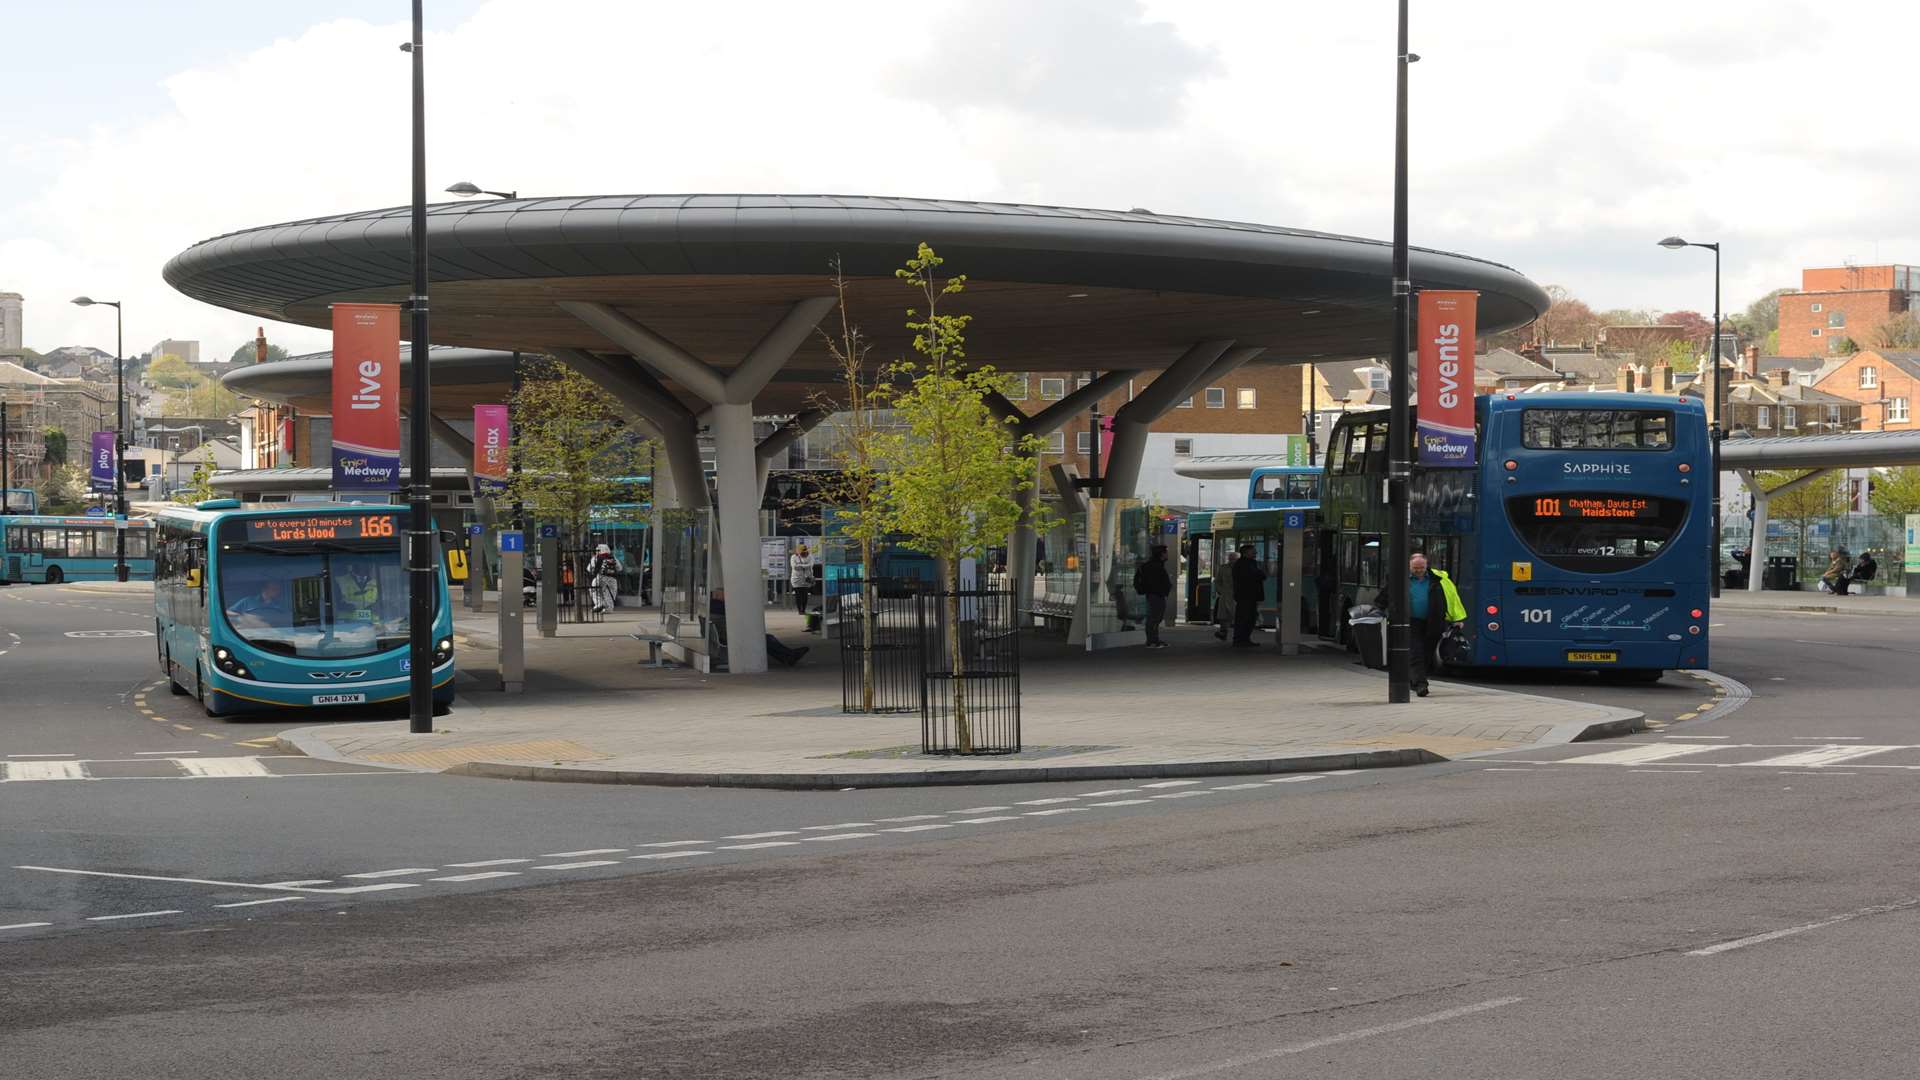 Toilets have been closed at Chatham bus station after being plagued by filthy vandalism